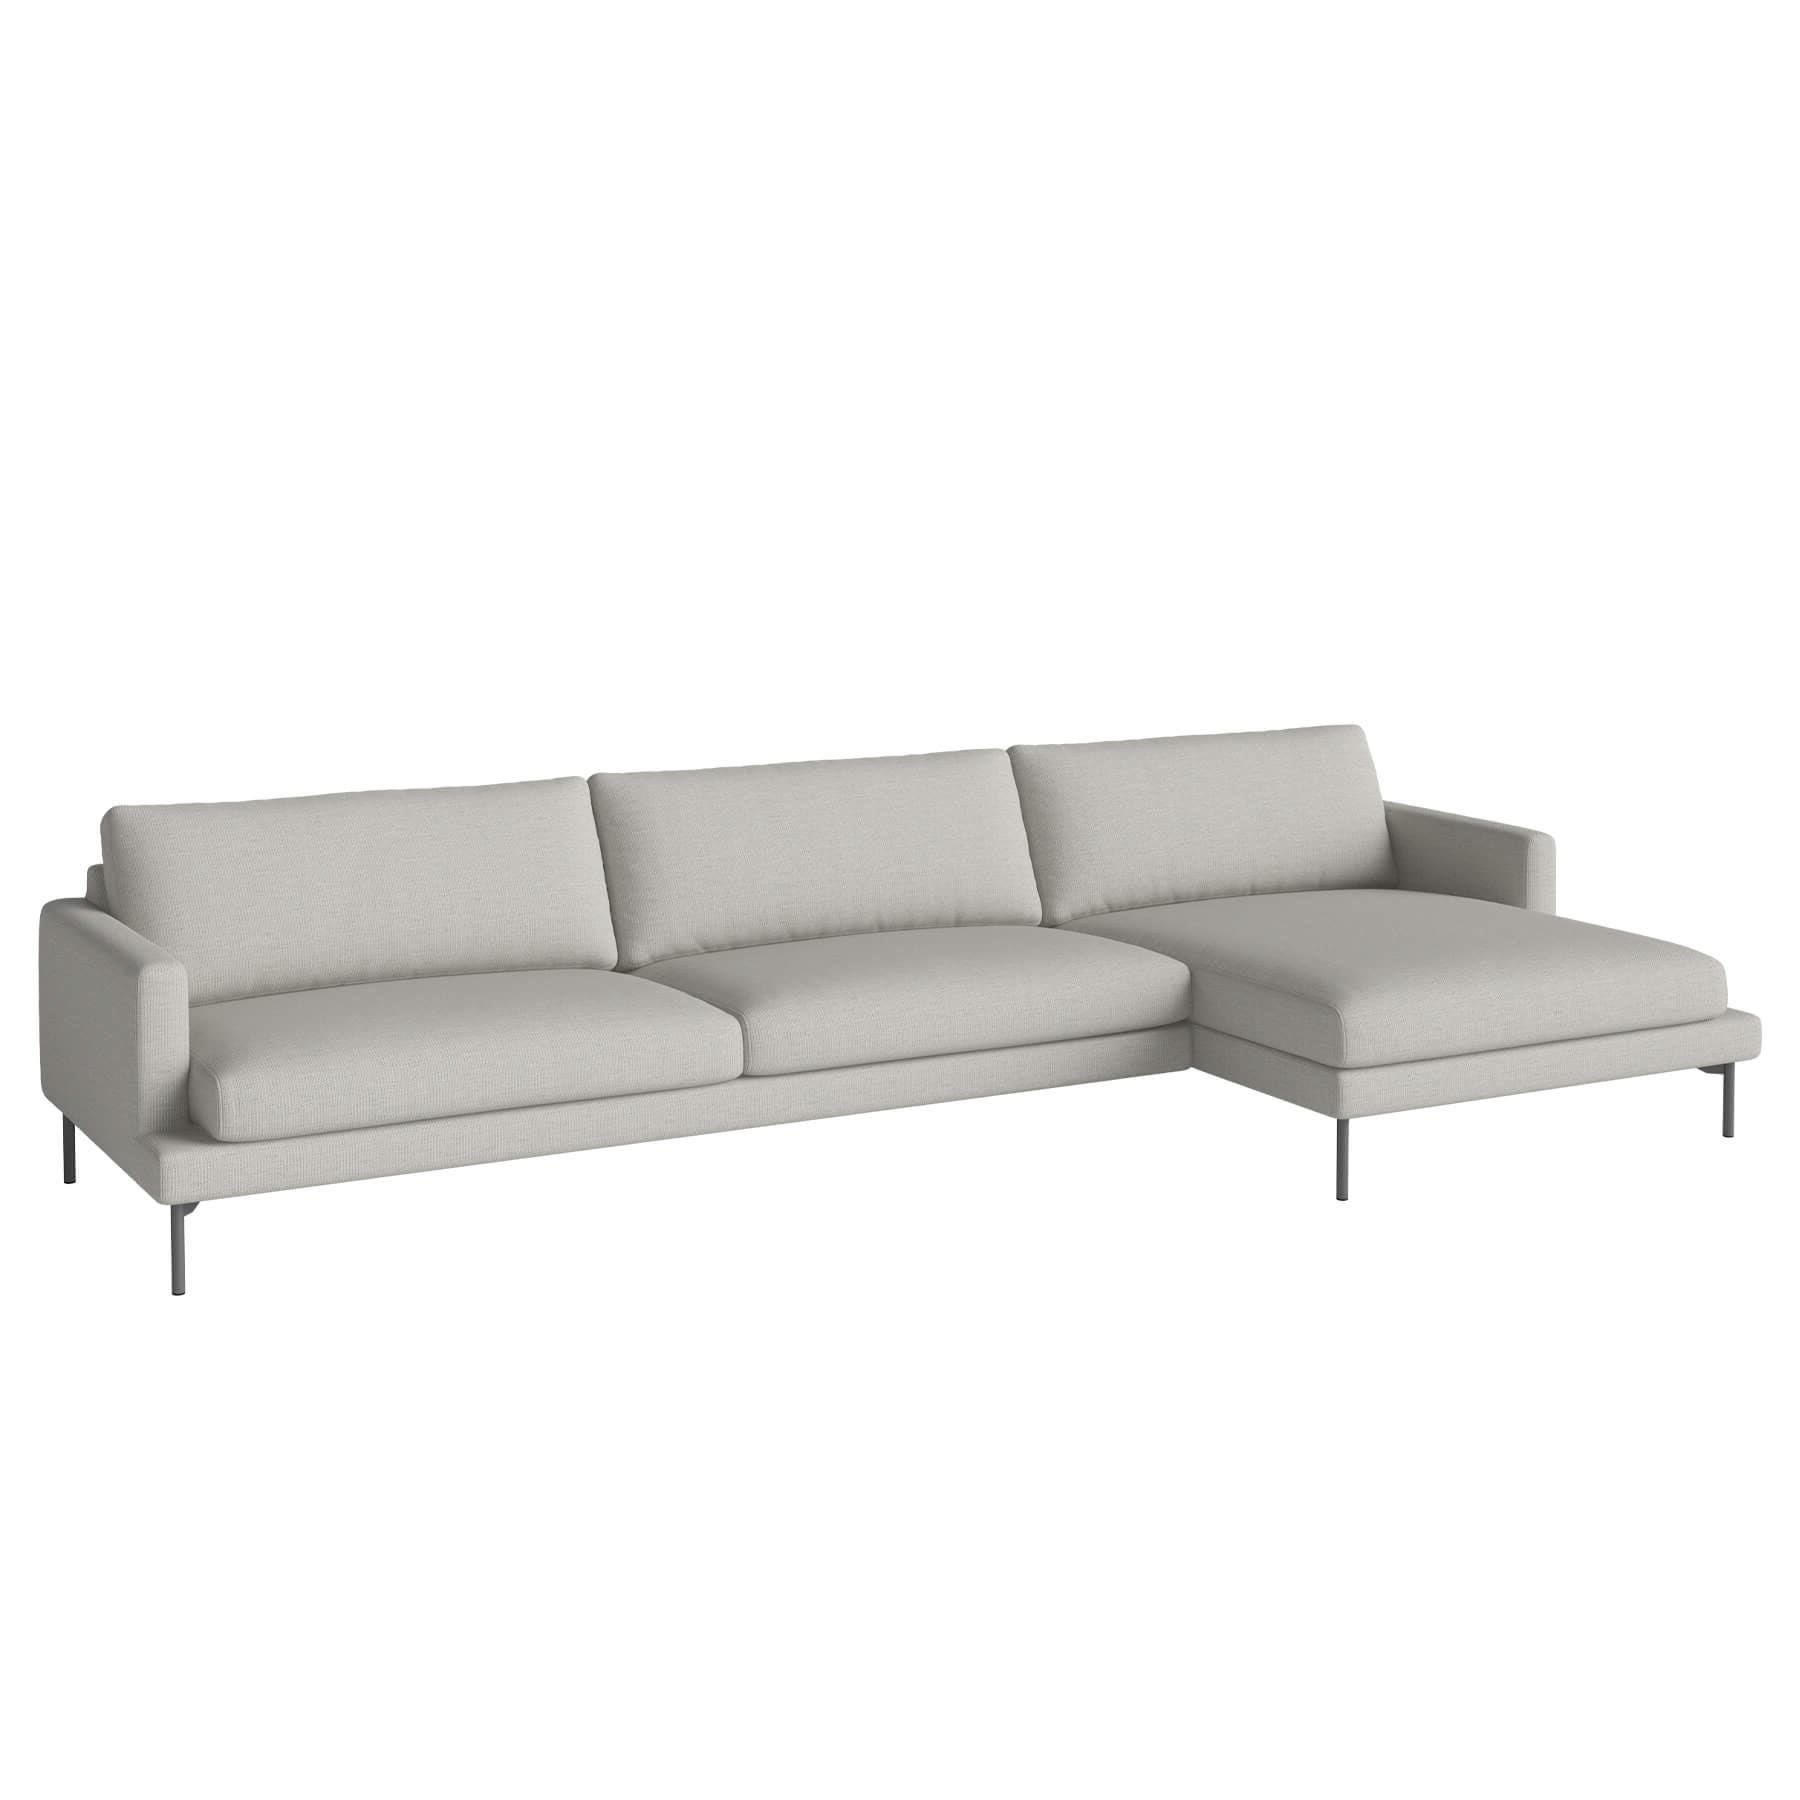 Bolia Veneda Sofa 45 Seater Sofa With Chaise Longue Grey Laquered Steel London Dust Green Right Designer Furniture From Holloways Of Ludlow